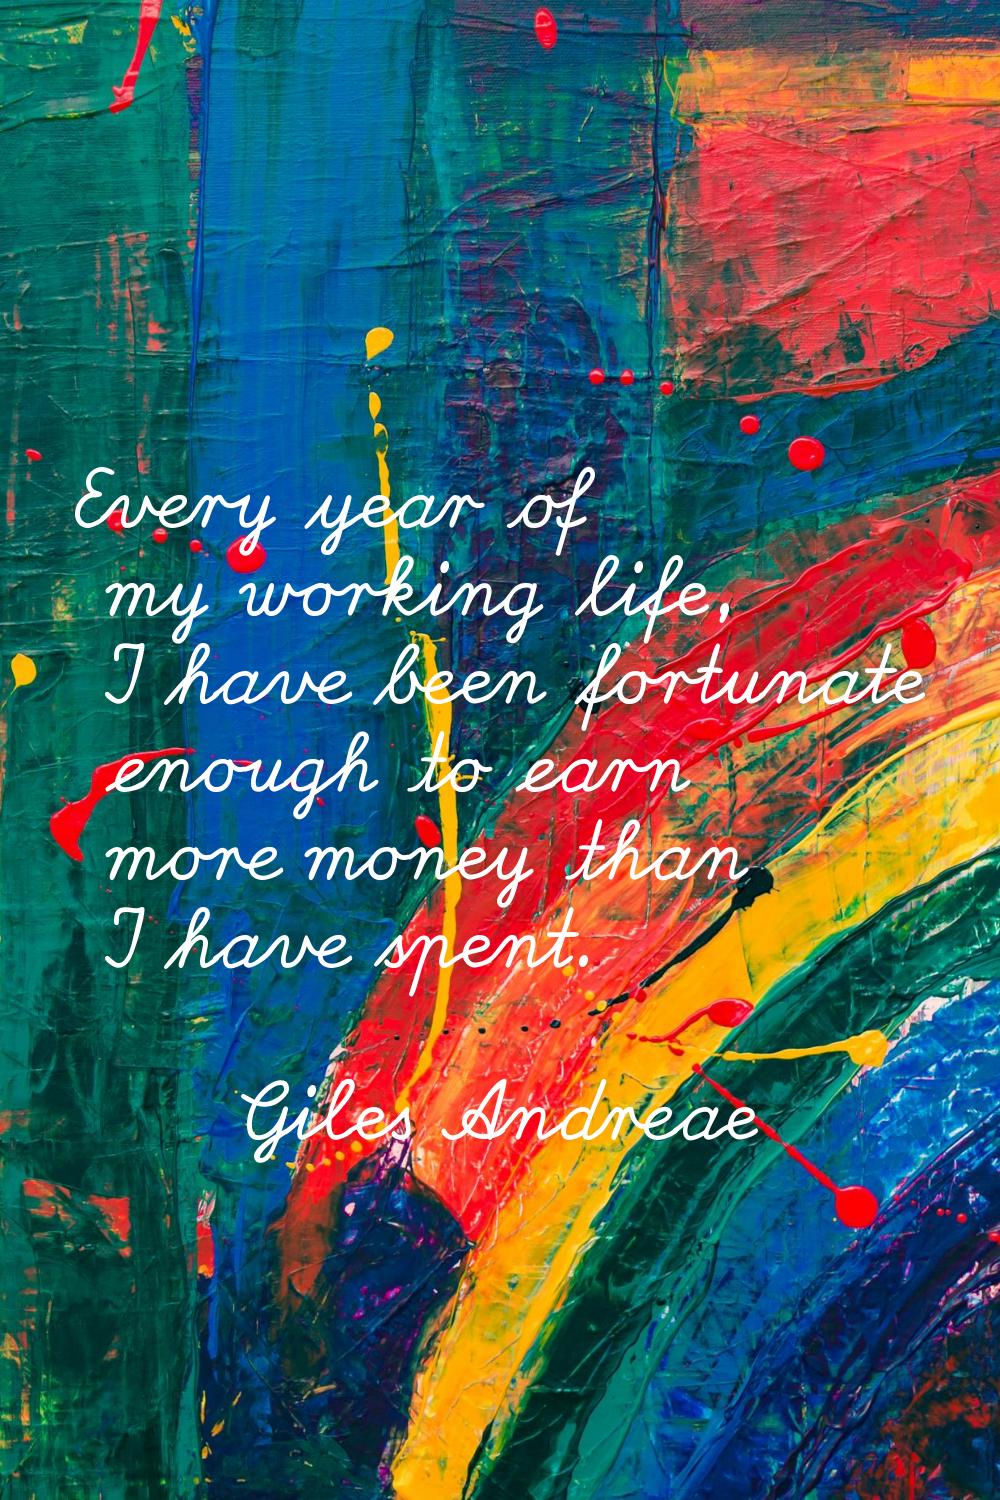 Every year of my working life, I have been fortunate enough to earn more money than I have spent.